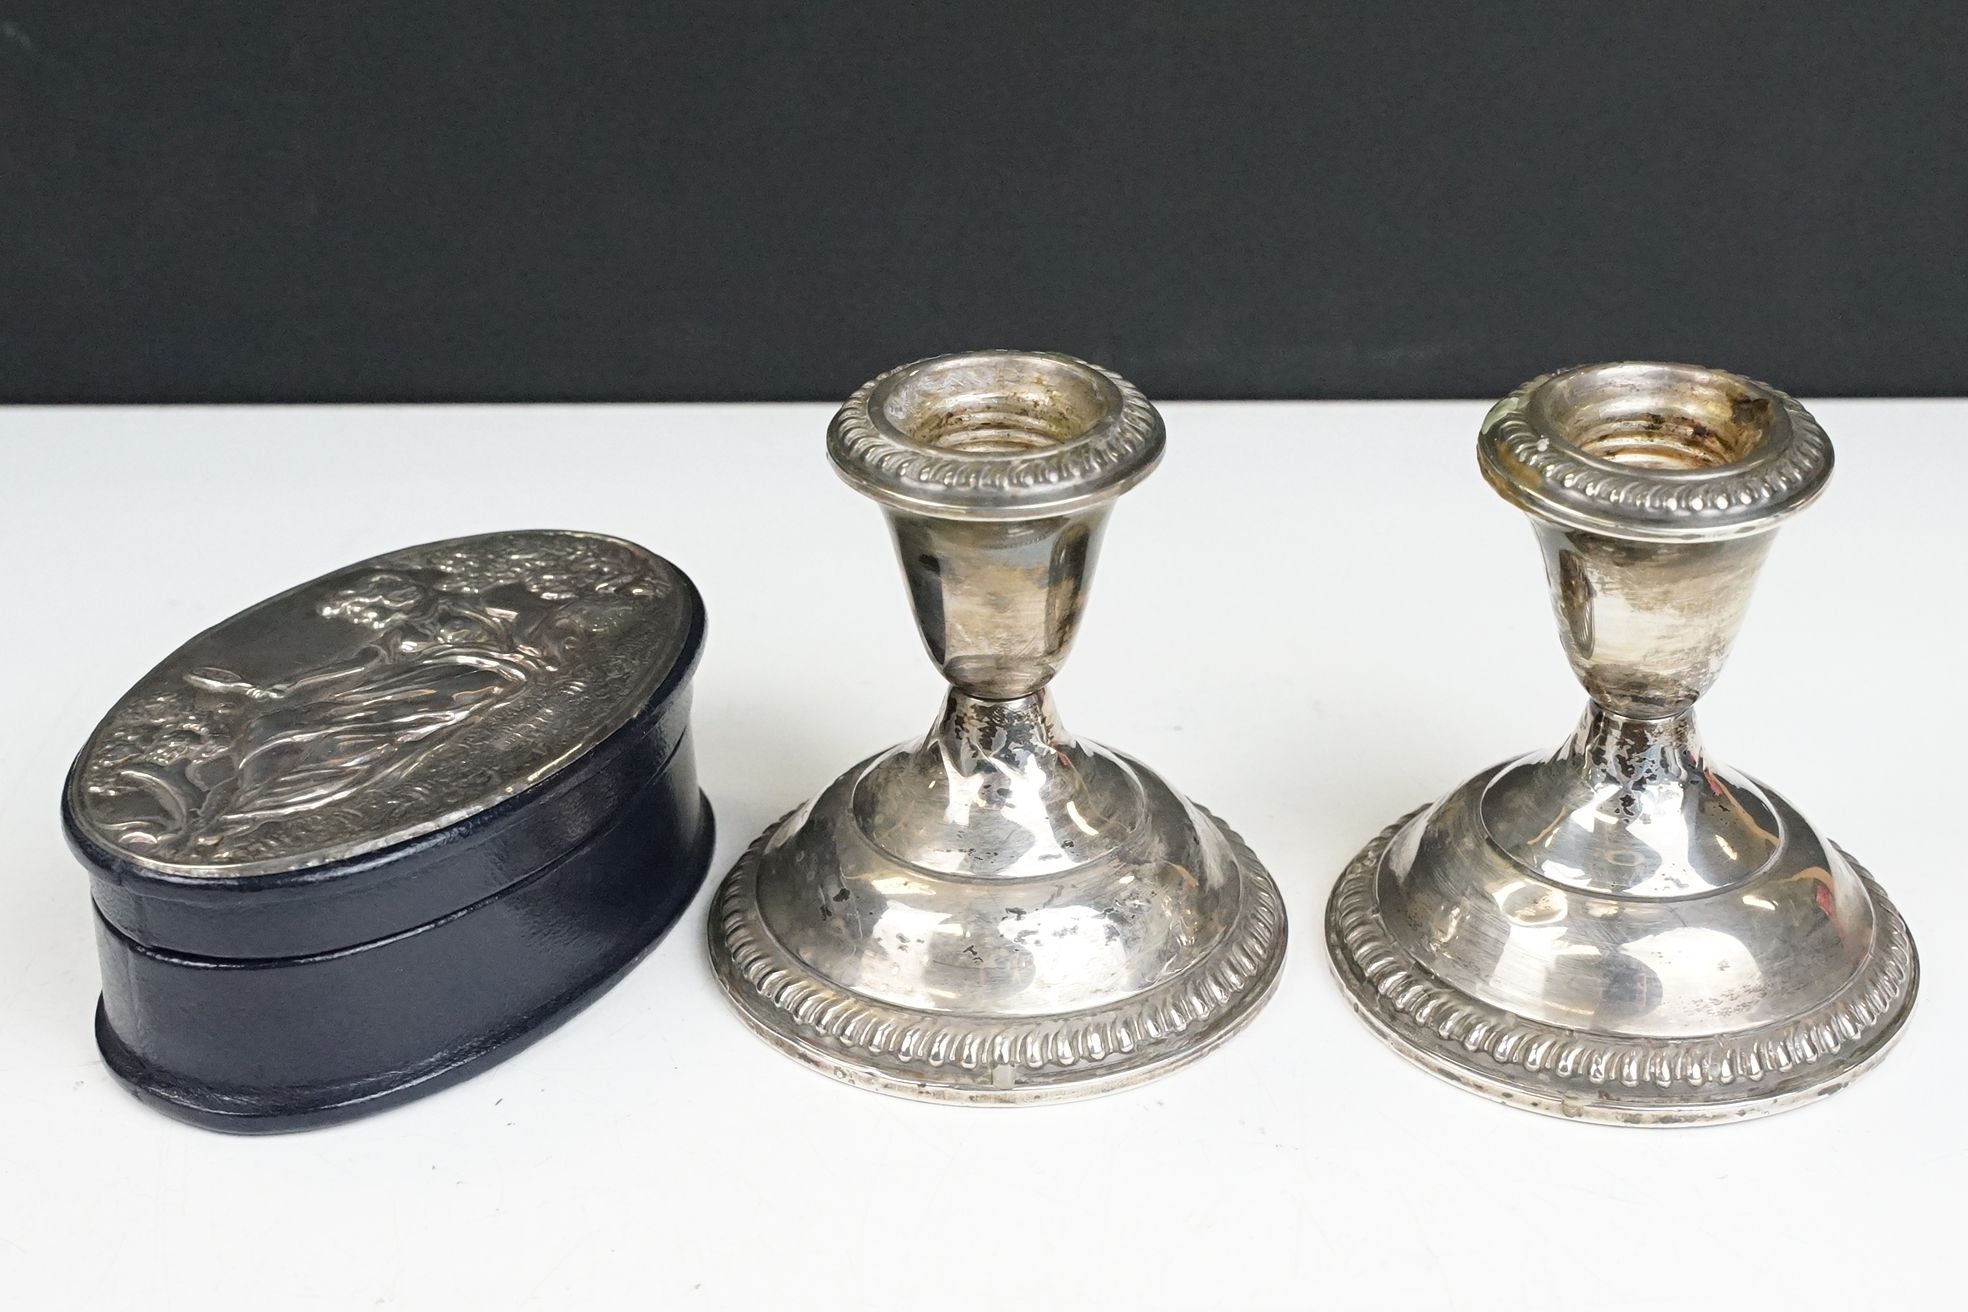 Pair of Empire Sterling weighted candle sticks with gadrooned borders together with a leather box